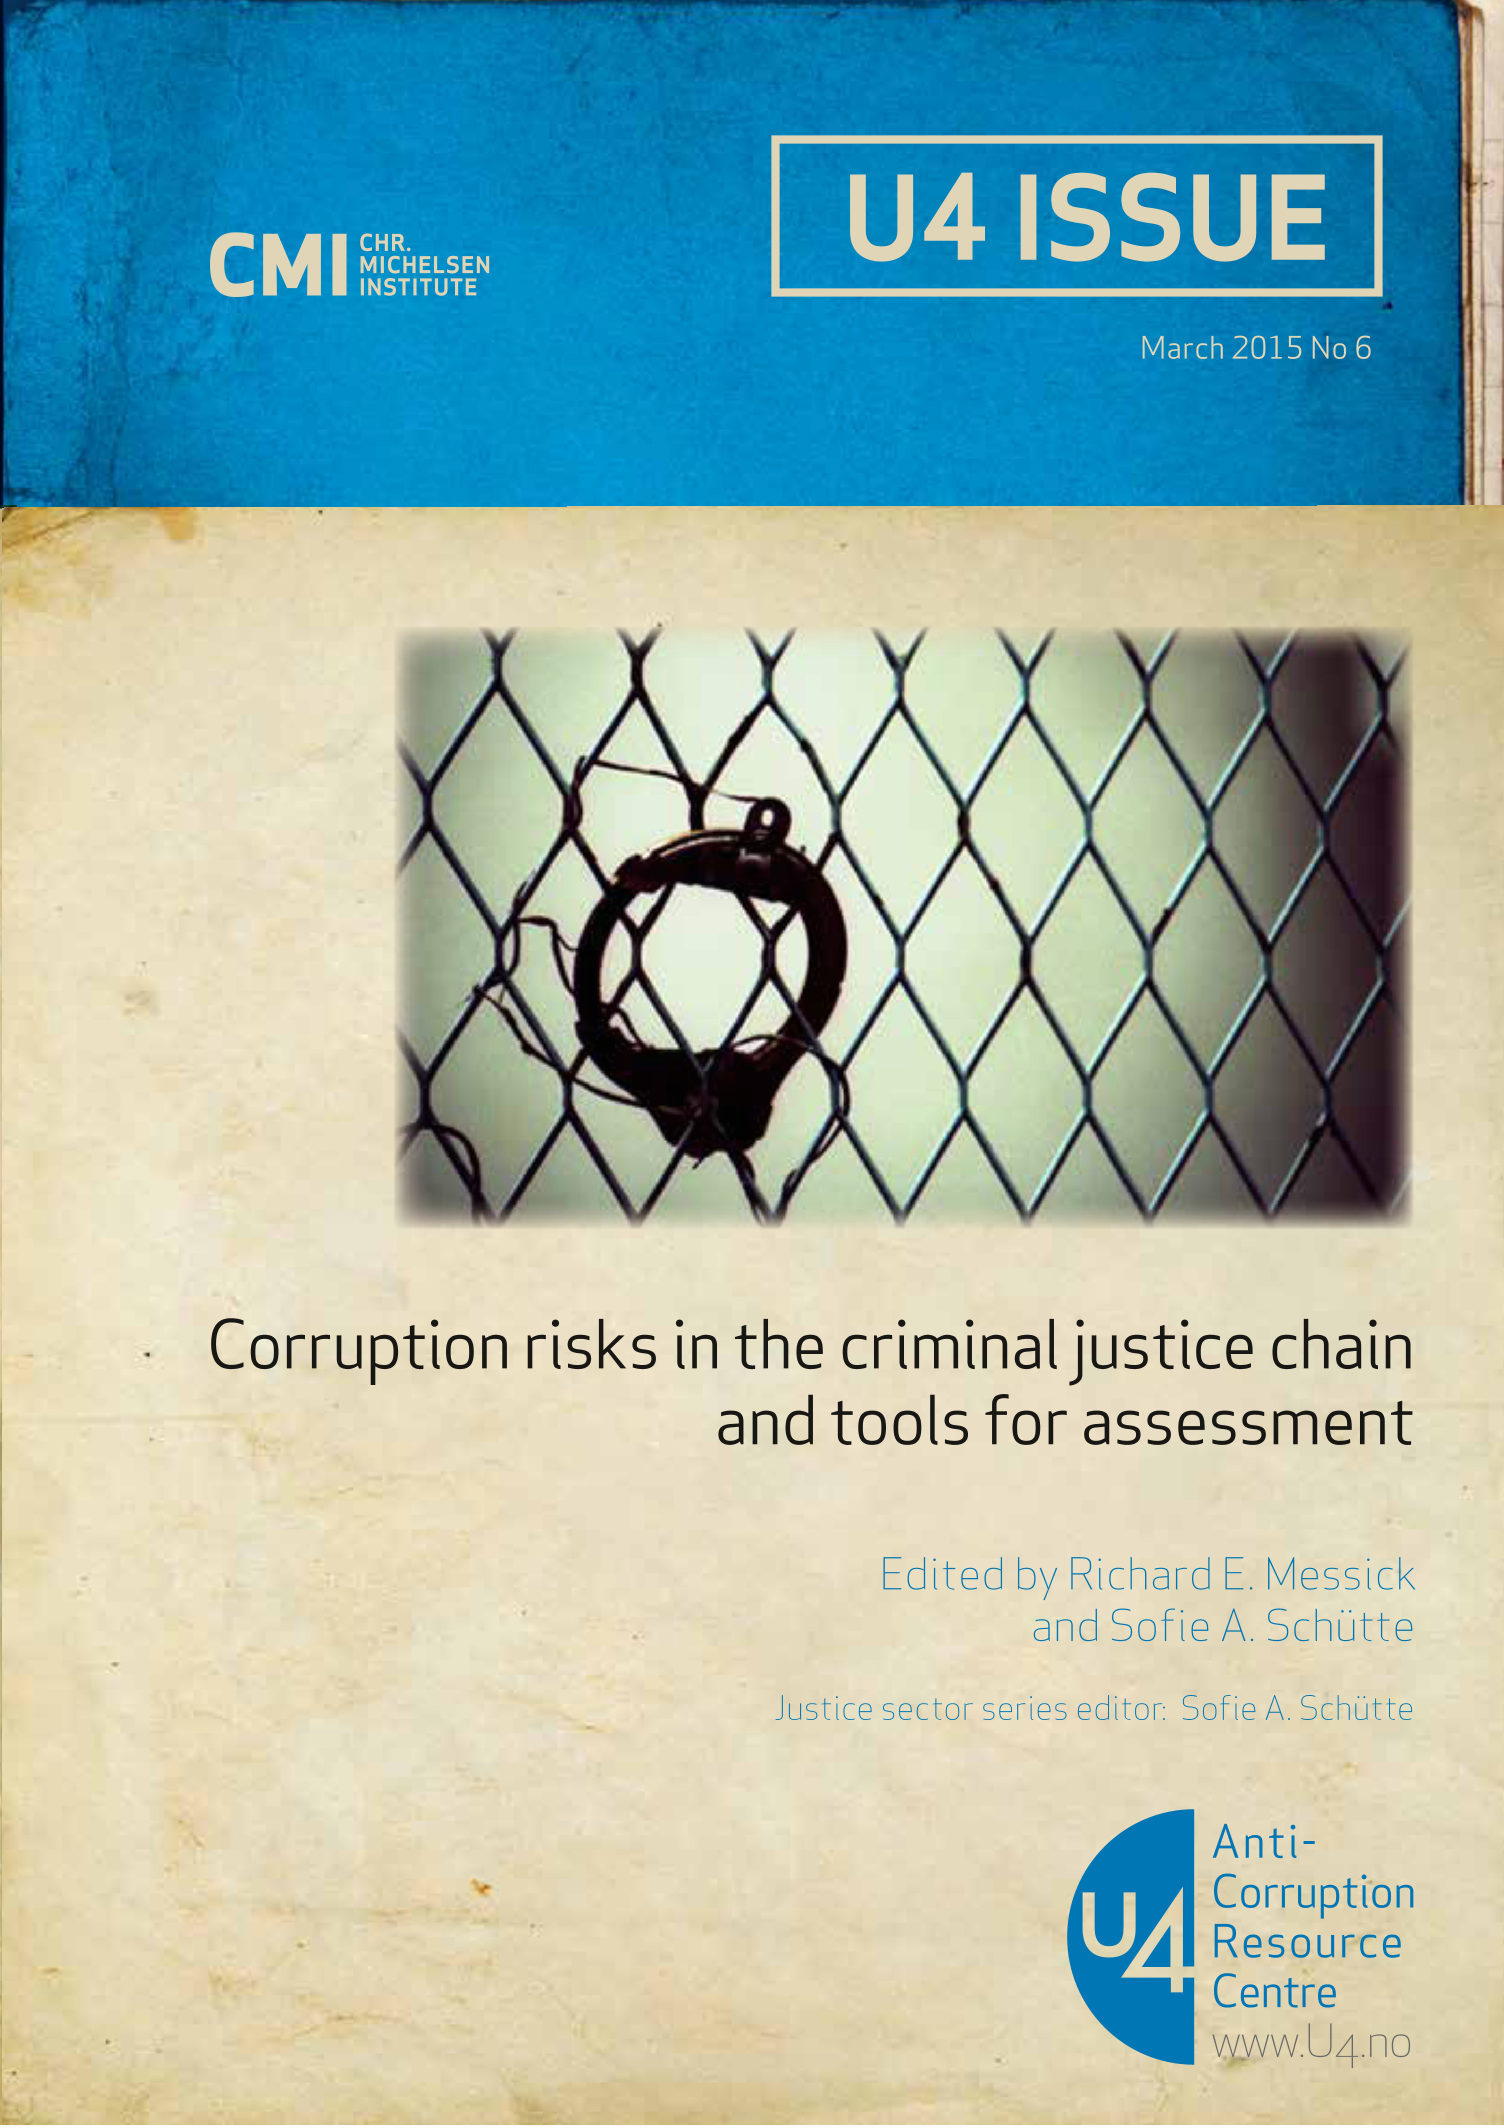 Corruption risks in the criminal justice chain and tools for assessment